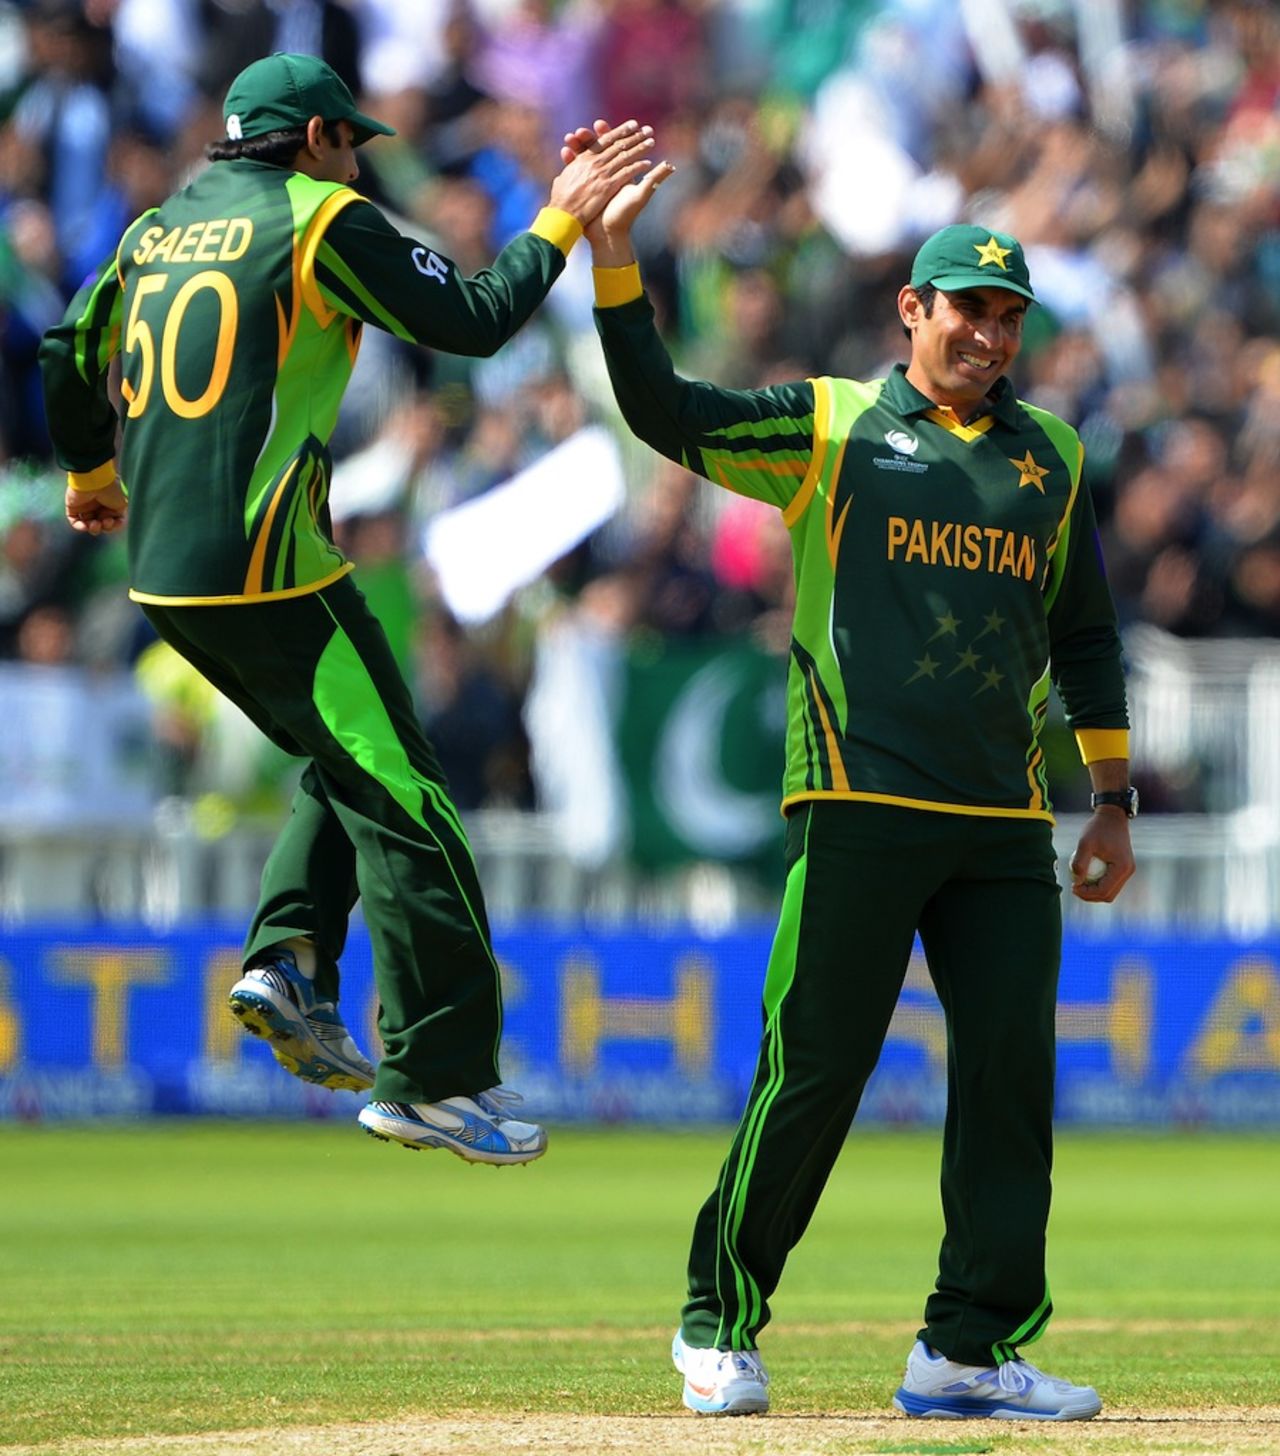 Misbah-ul-Haq is congratulated by Saeed Ajmal after a run out, Pakistan v South Africa, Champions Trophy, Group B, Edgbaston, June 10, 2013